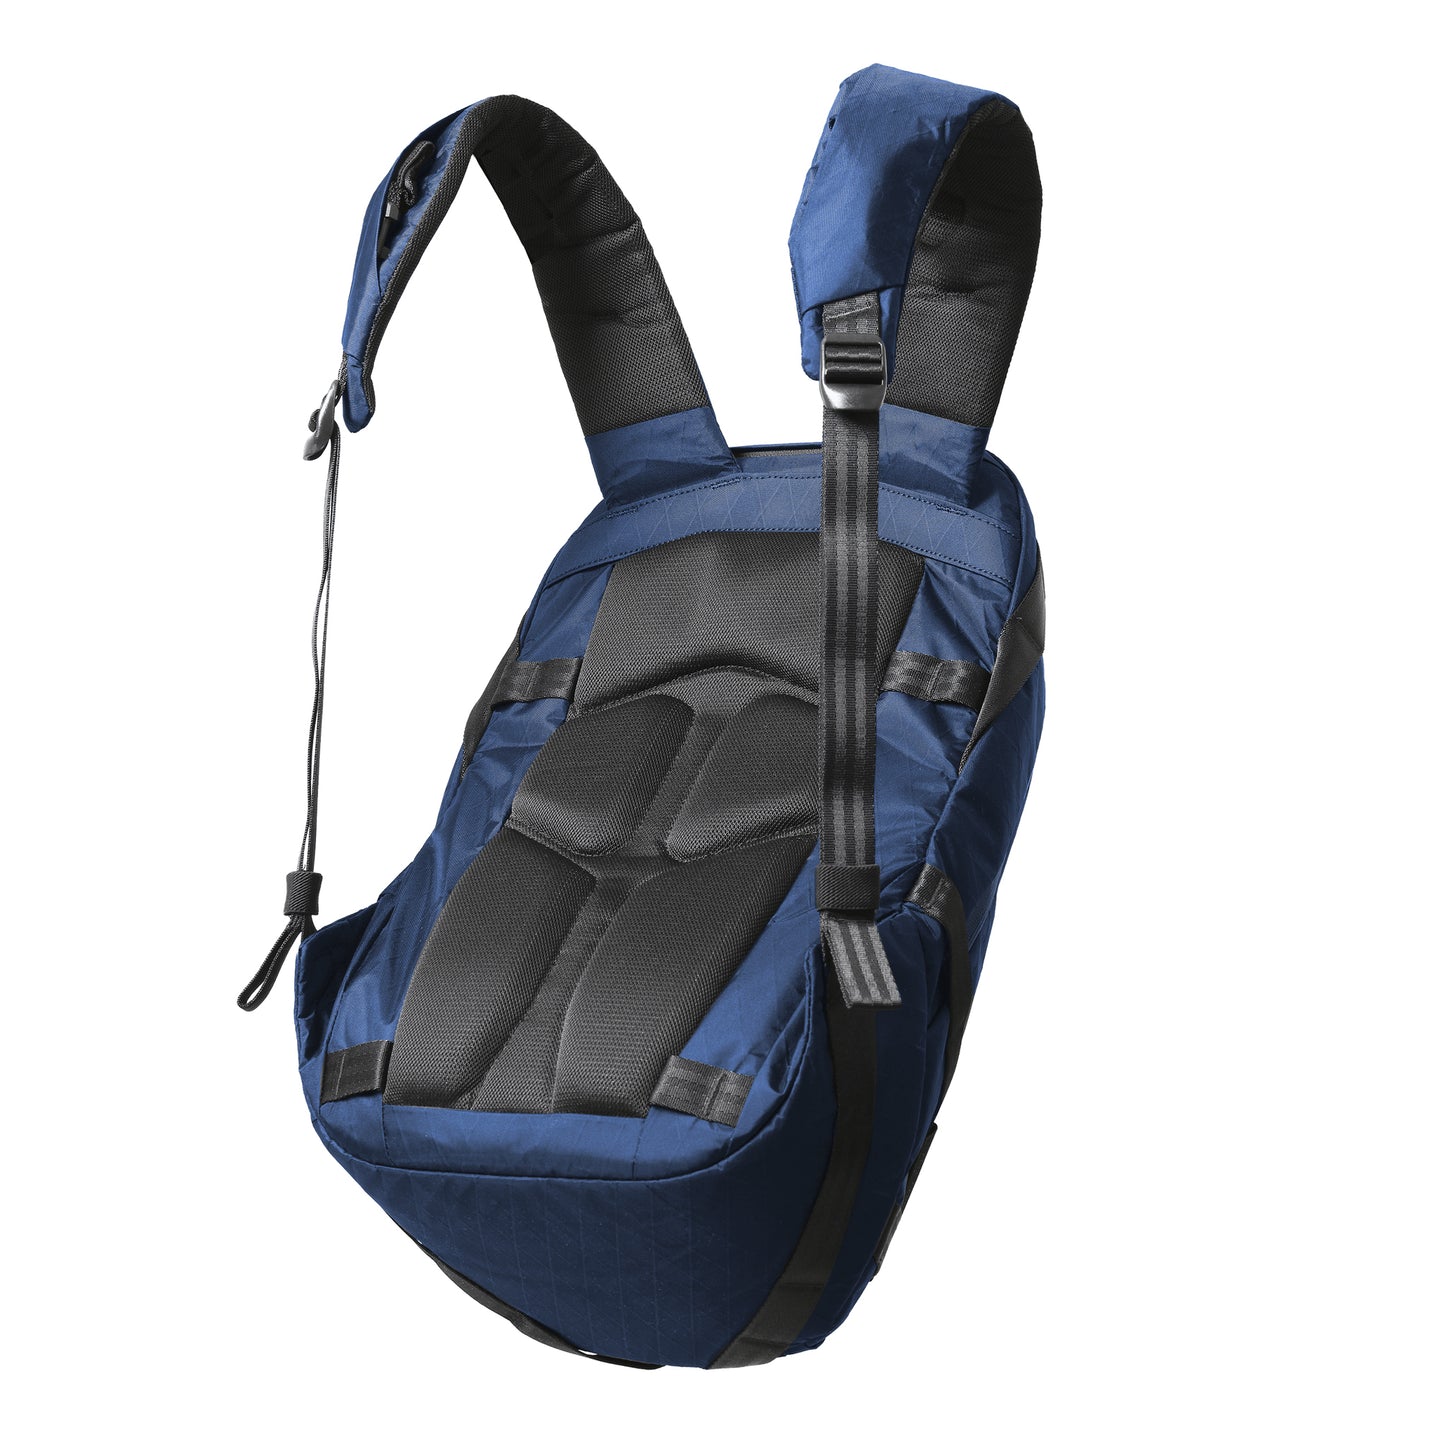 ABLE CARRY DAILY PLUS BACKPACK - NAVY